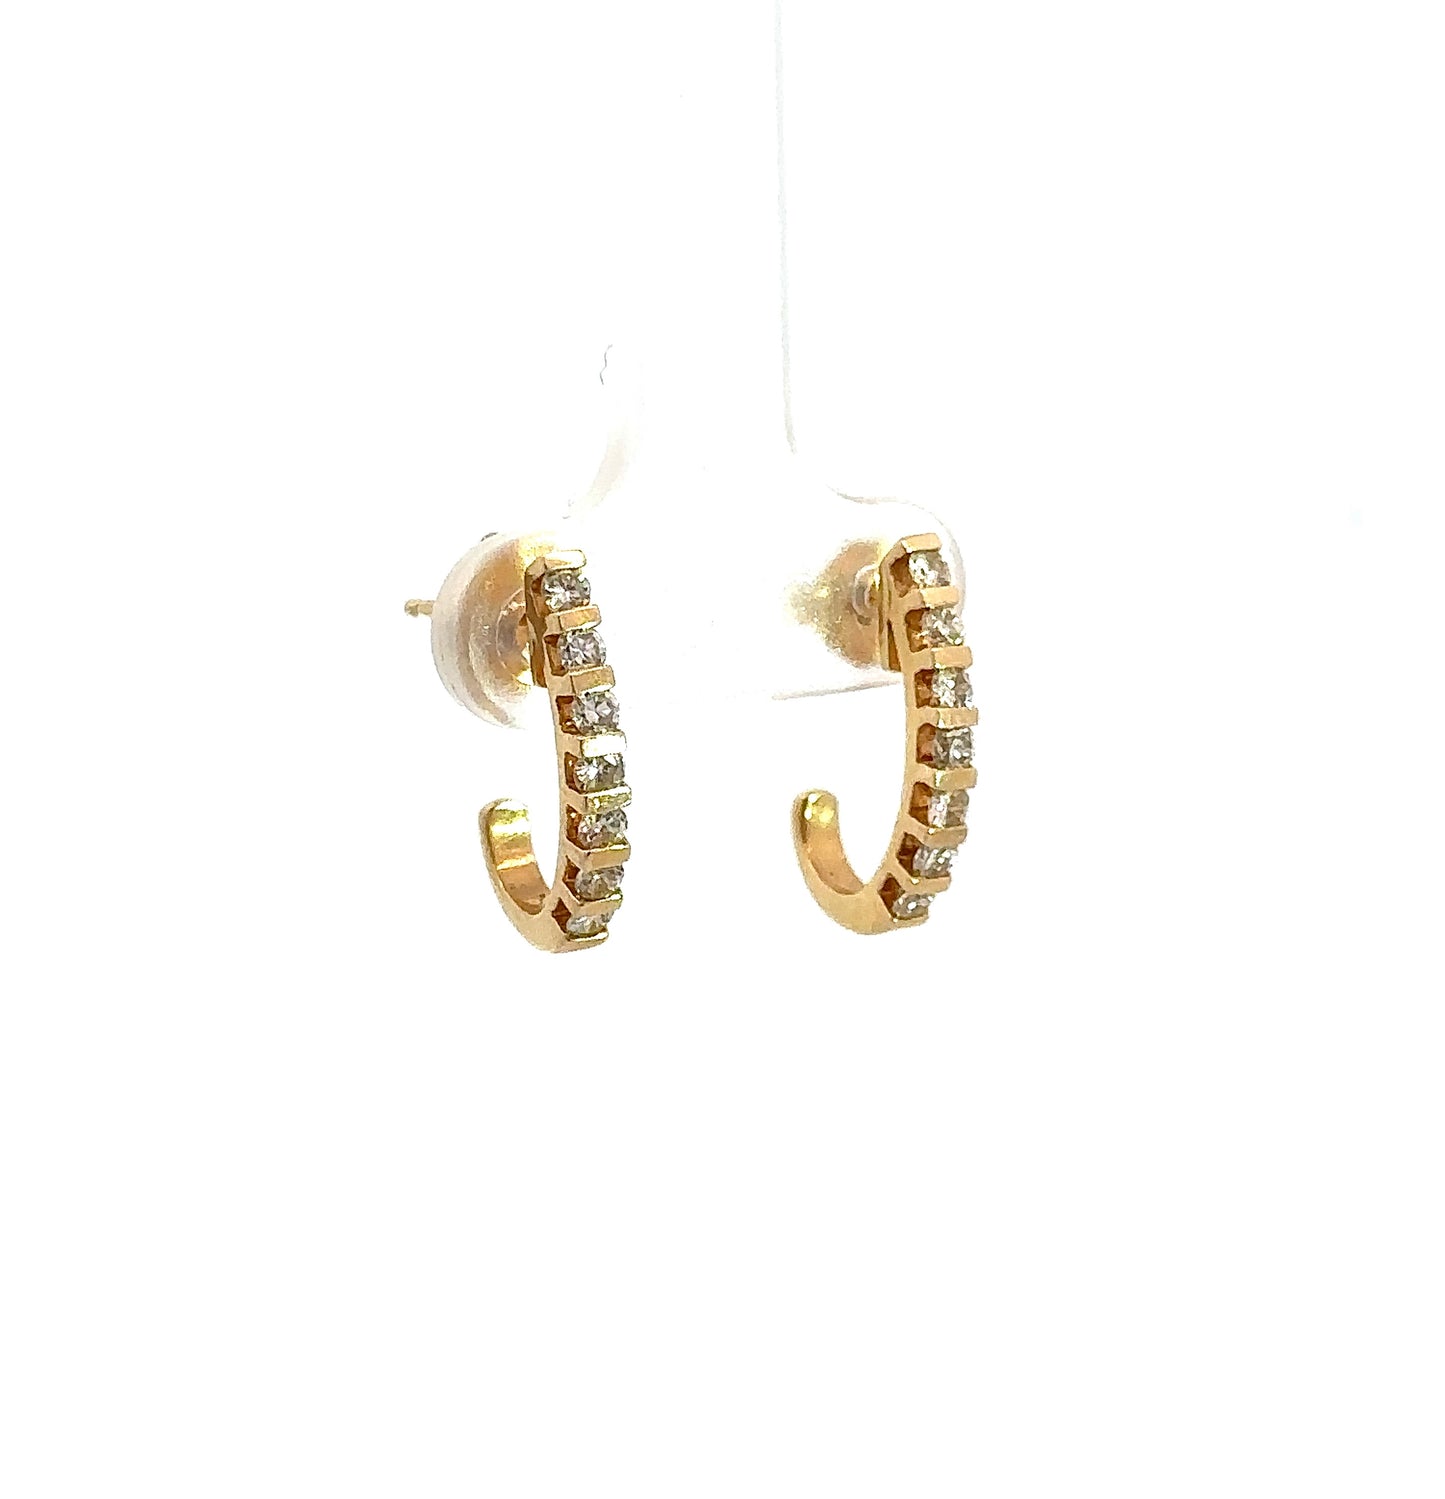 Diagonal view of yellow gold earrings with 7 small round diamonds on each ear with a curved detail and open back.